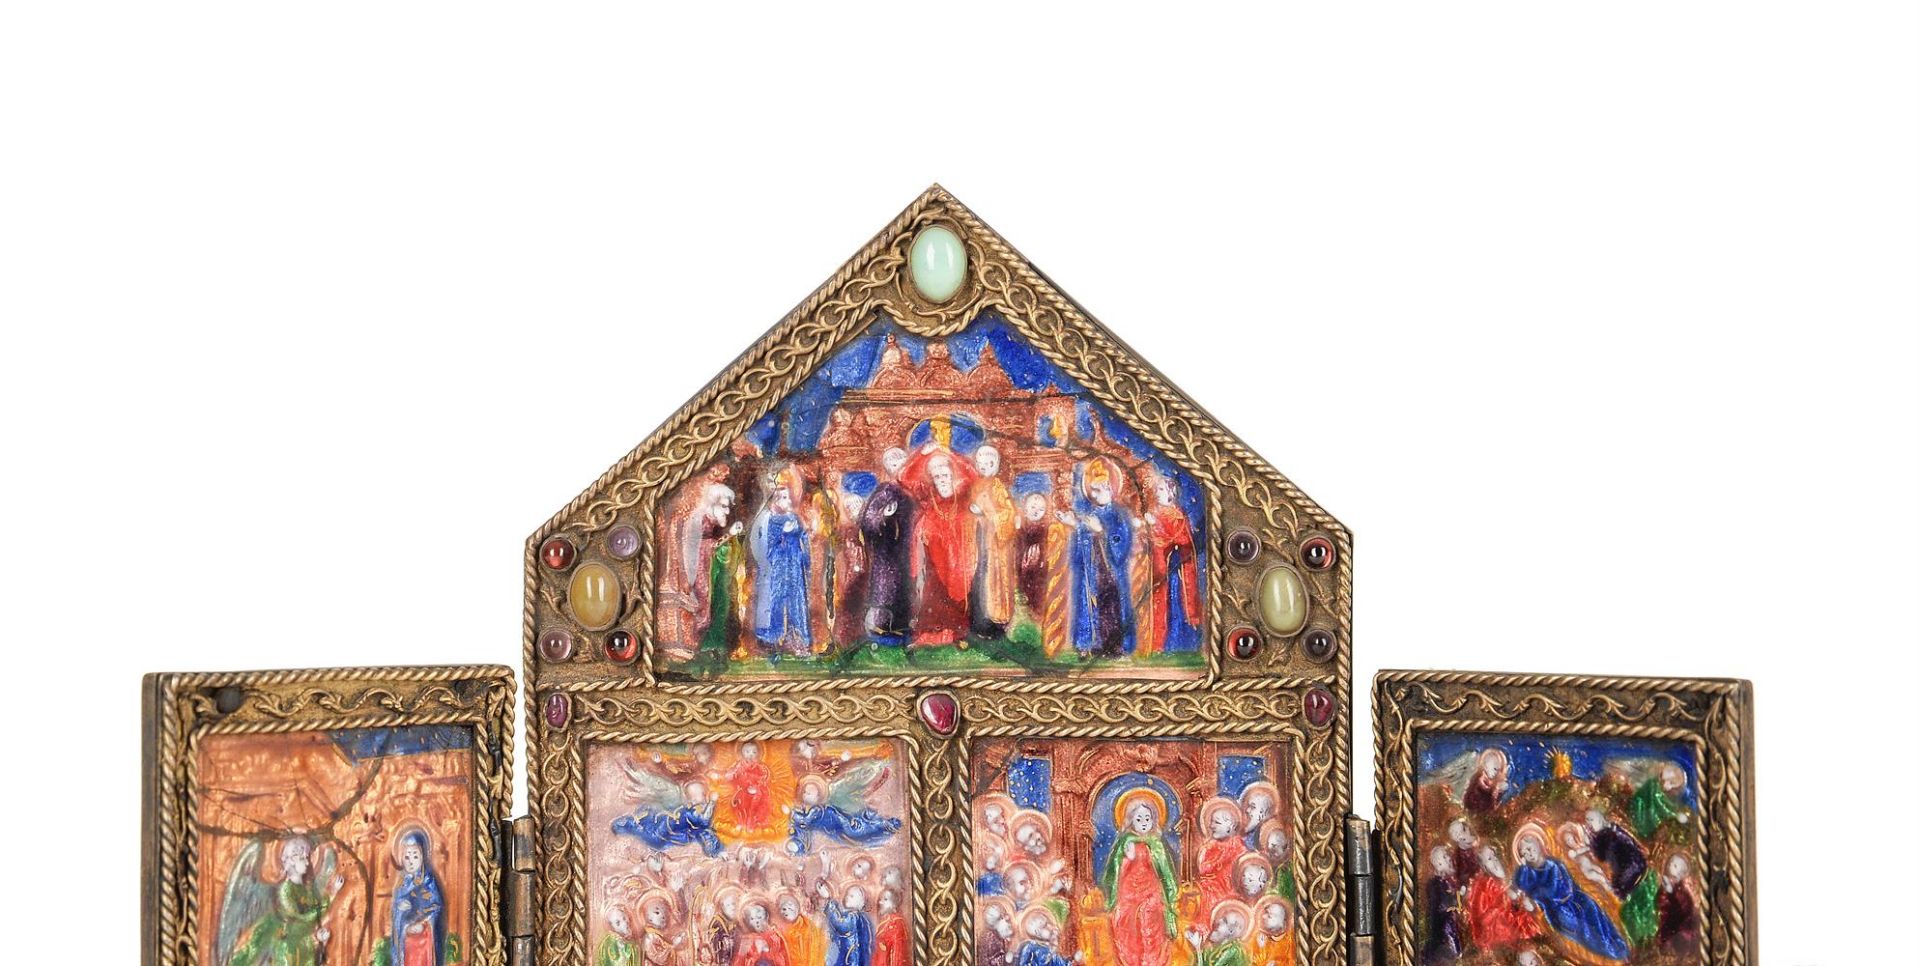 AN ENAMEL SET FOLDING DEVOTIONAL TRIPTYCH IN THE EARLY 16TH CENTURY LIMOGES MANNER - Image 2 of 6